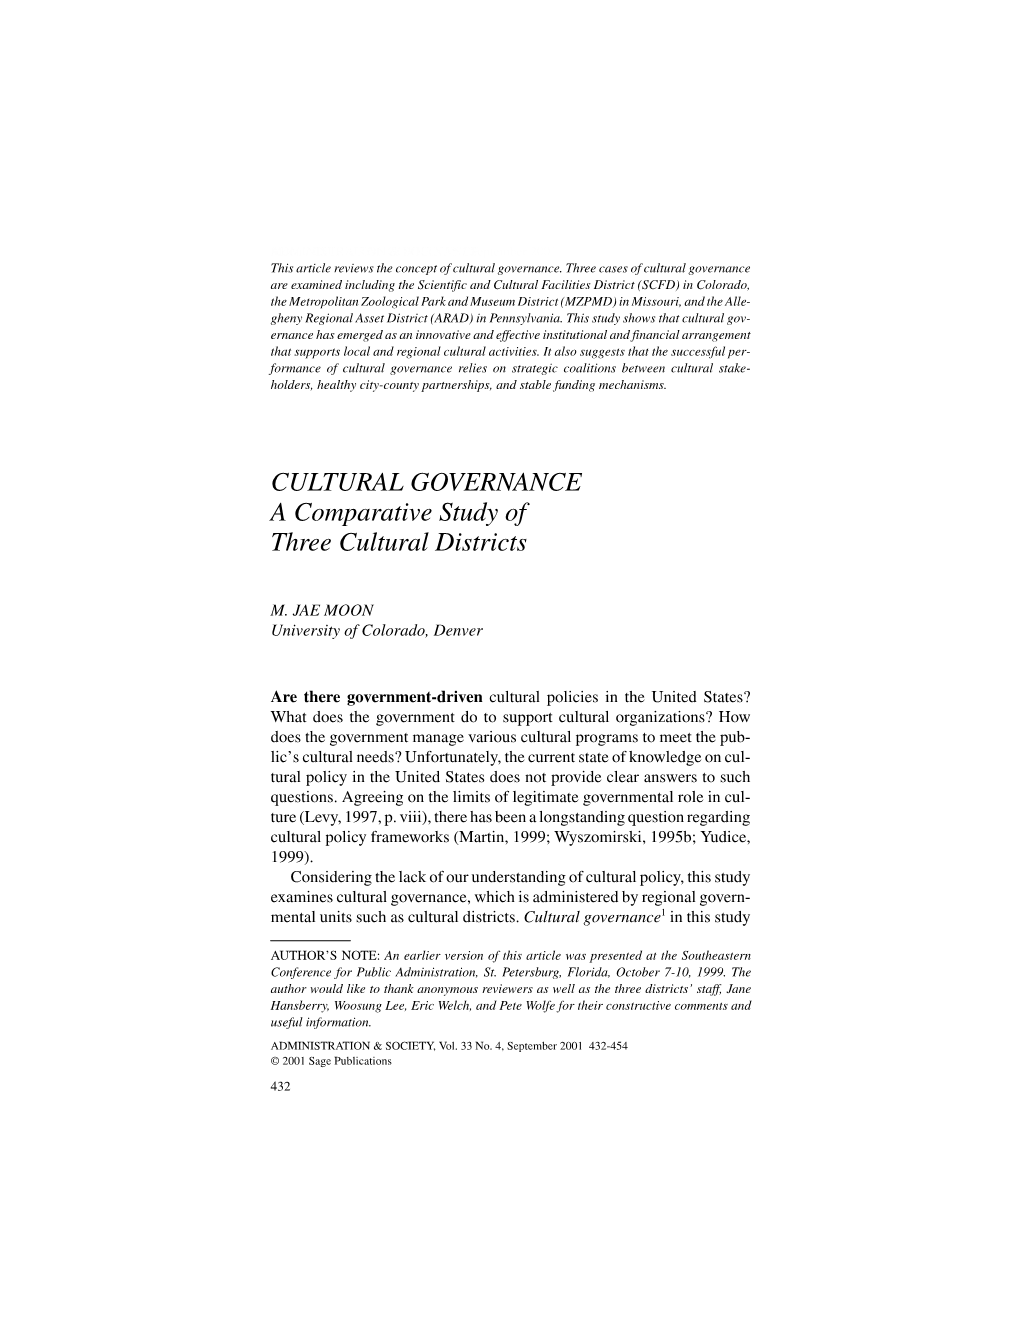 CULTURAL GOVERNANCE a Comparative Study of Three Cultural Districts